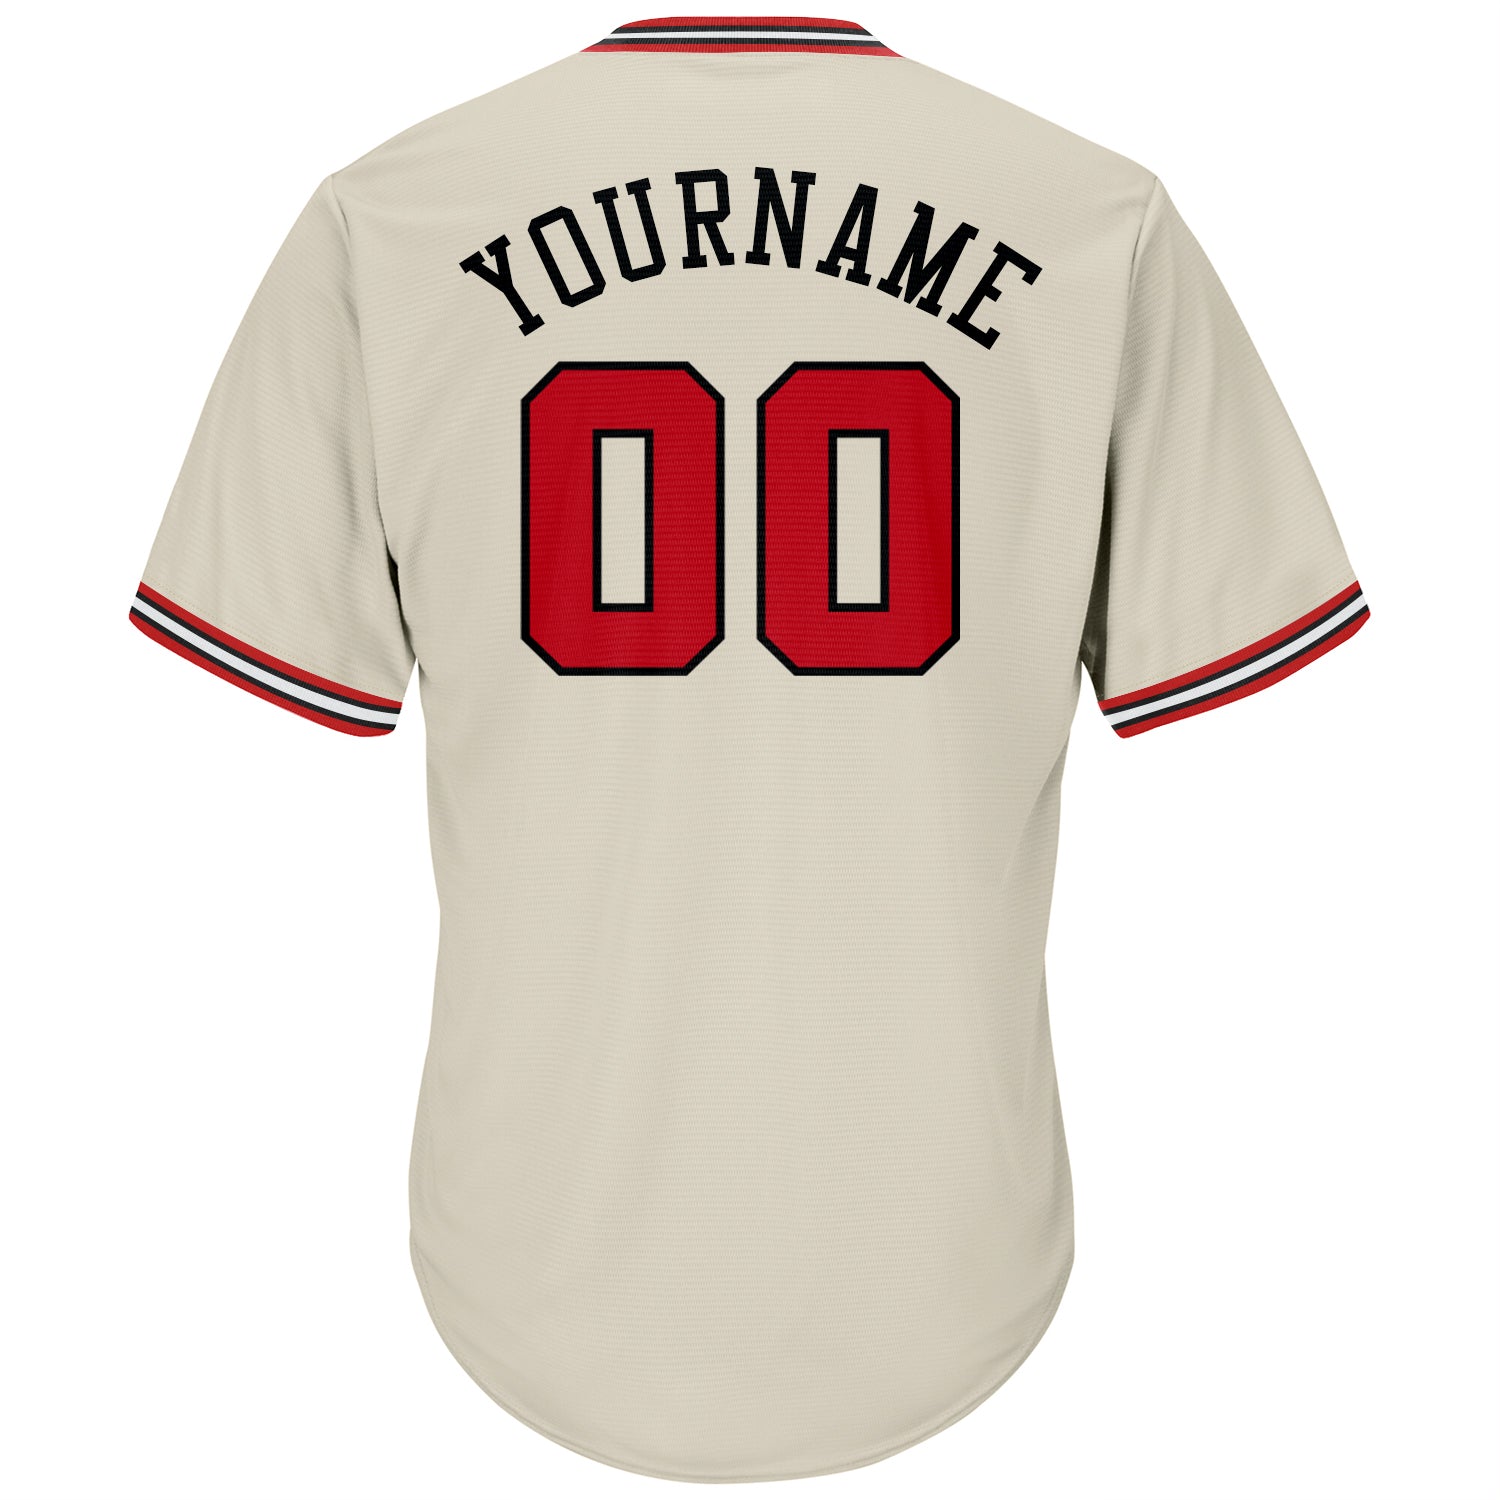 Custom Baseball Jersey Embroidered Your Names and Numbers – Cream/Red